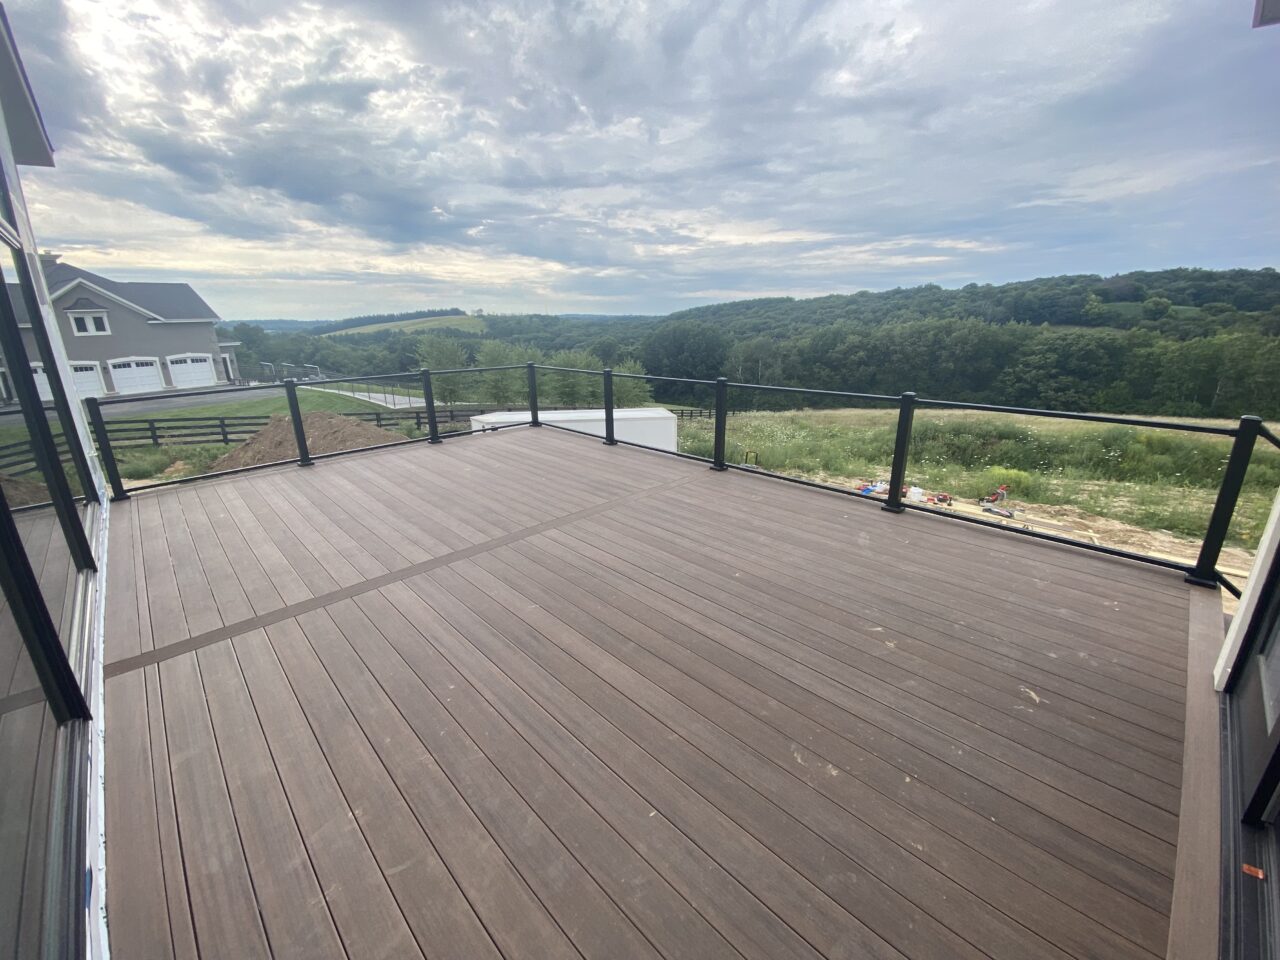 Photo of Composite Decking with Glass Railing - Deck Remodeling & Deck Resurfacing Services​ contractor - Washington County, WI